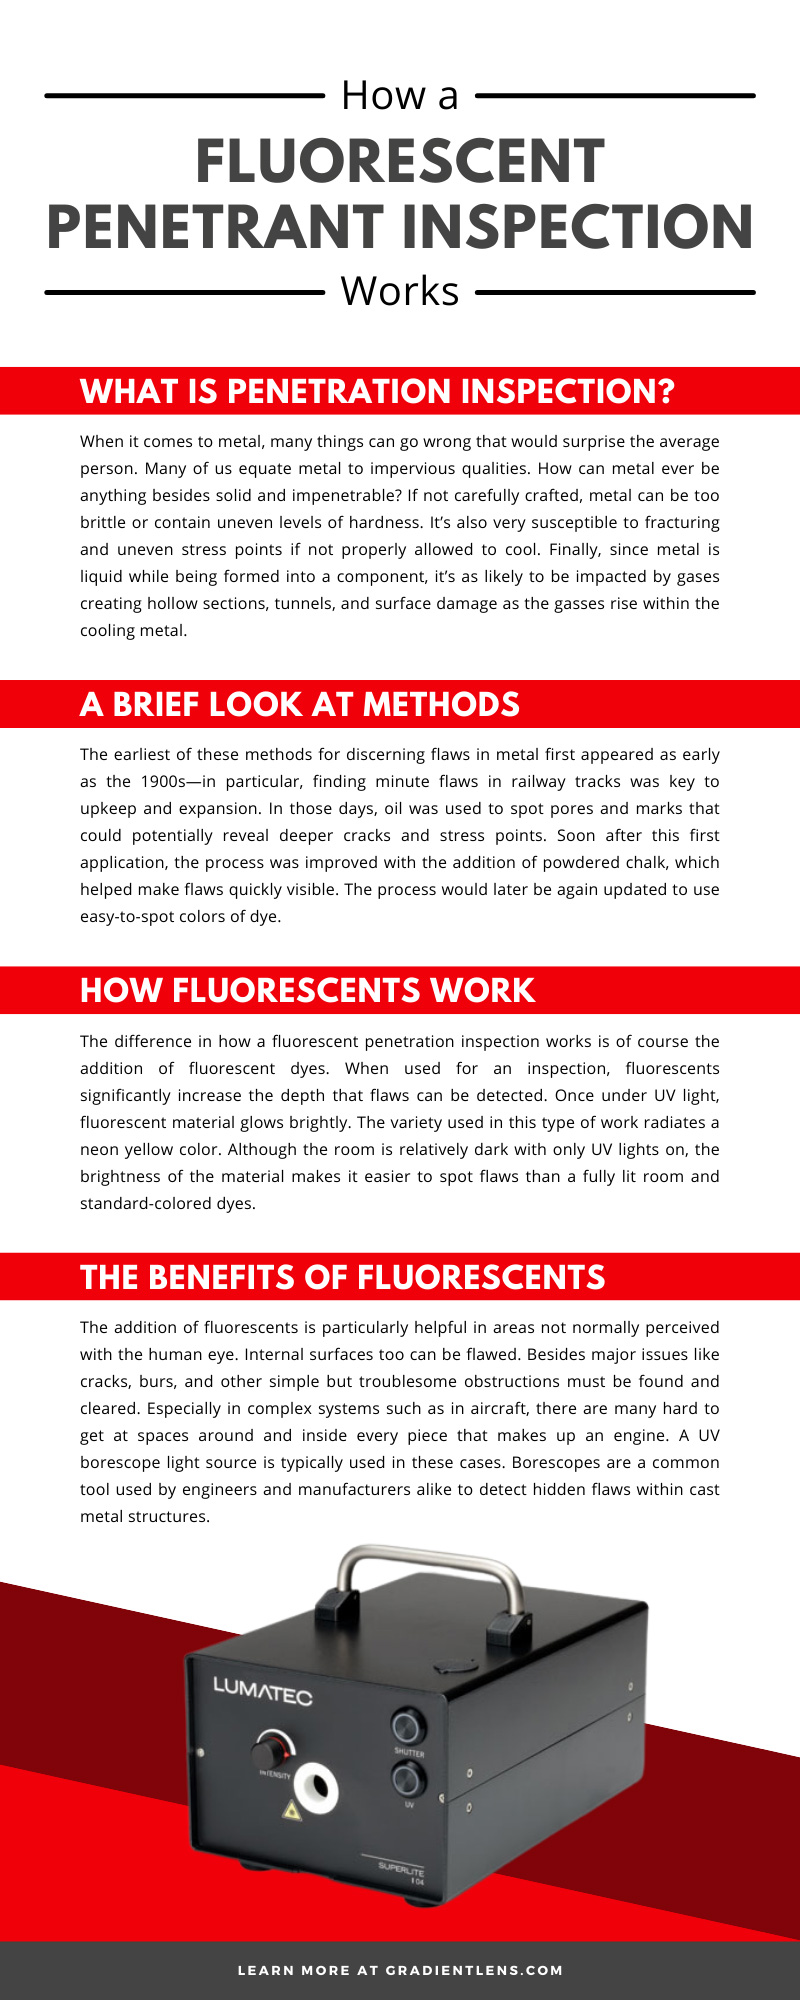 How a Fluorescent Penetrant Inspection Works